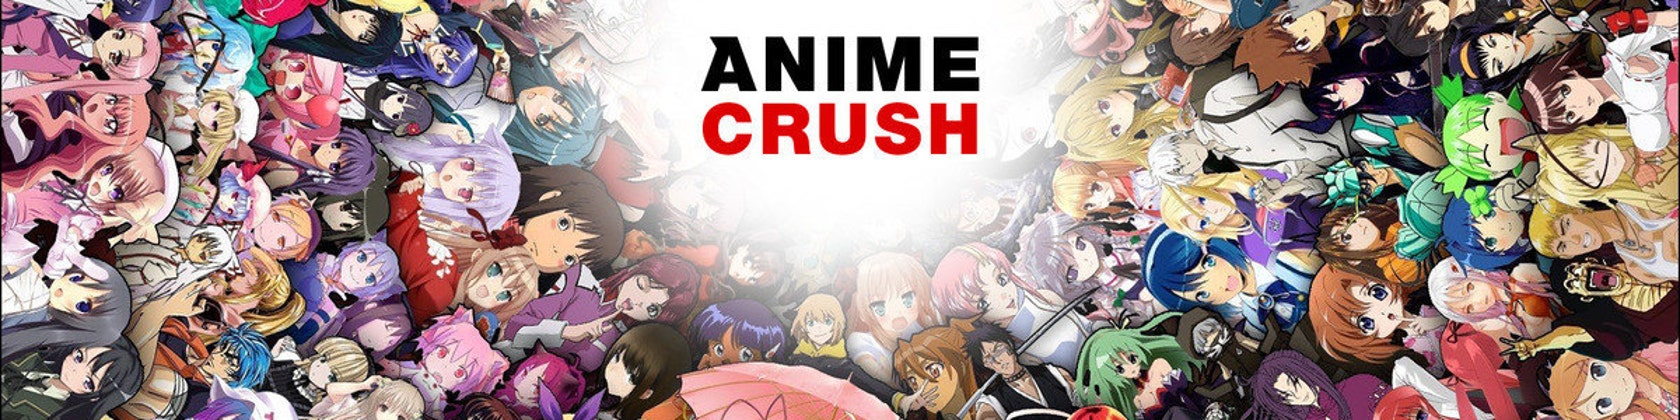 10 Anime characters who were obsessed with their crush